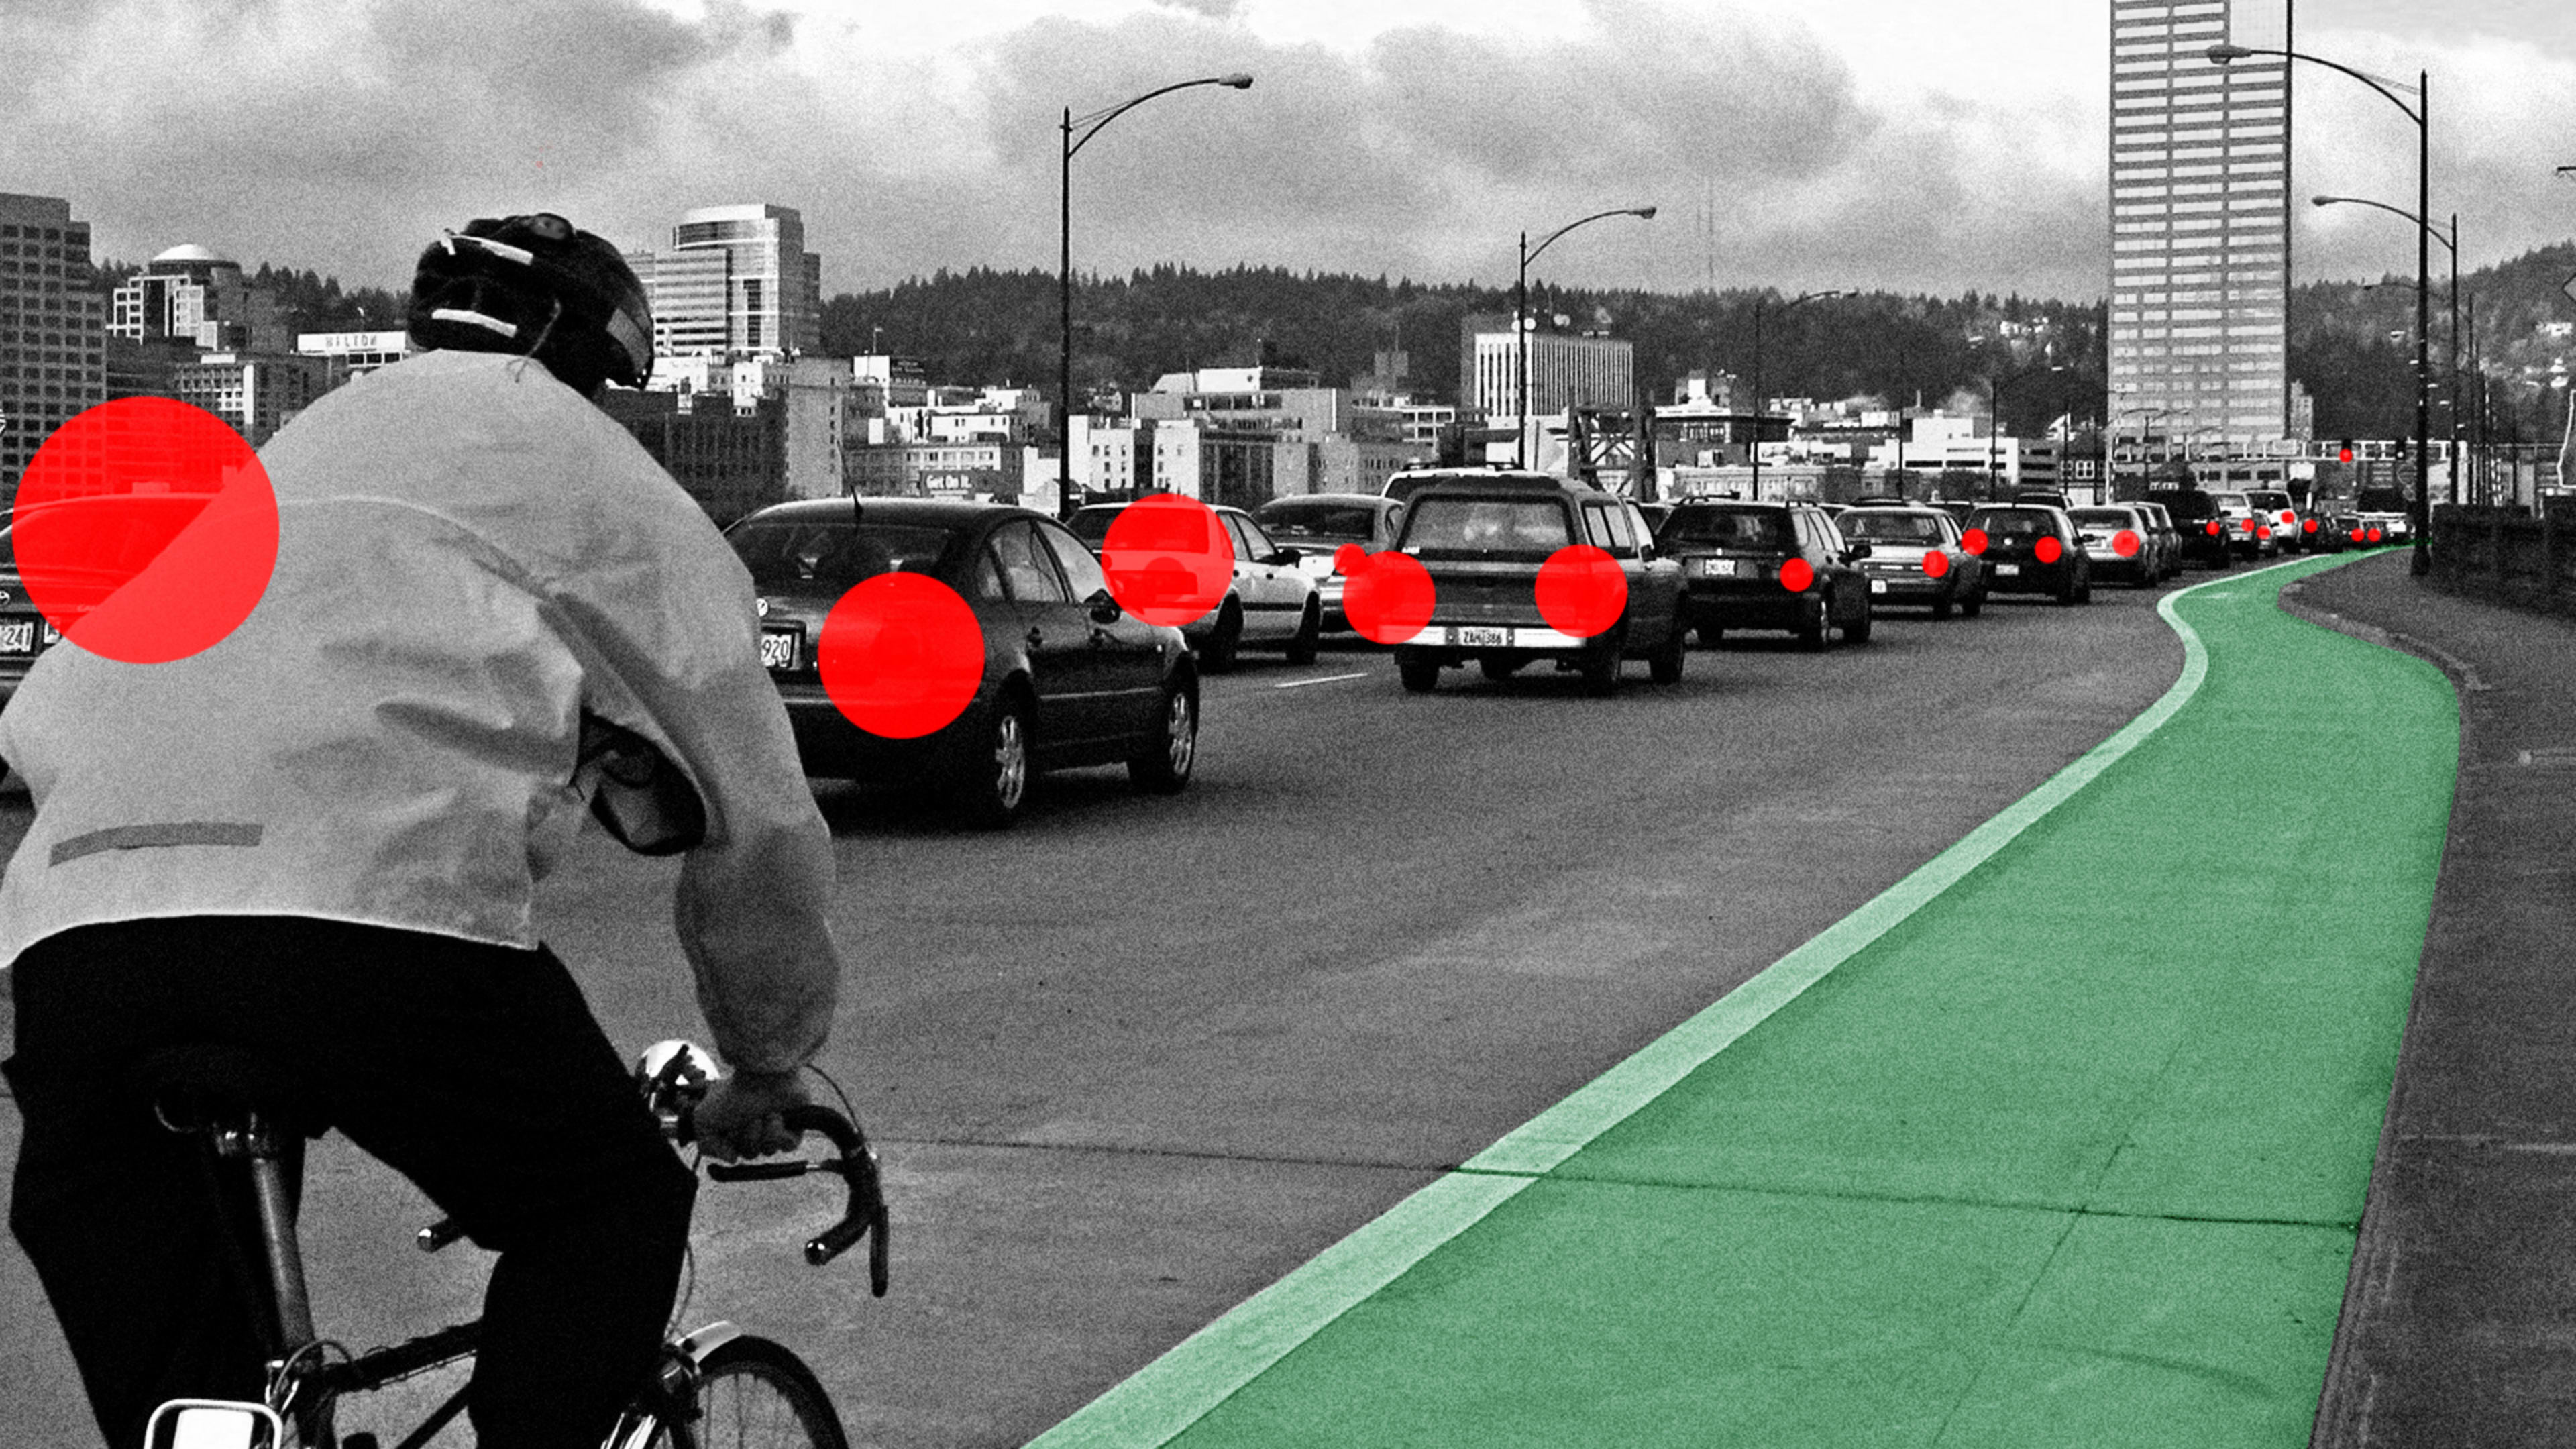 This new proposal would give bike commuters a tax break